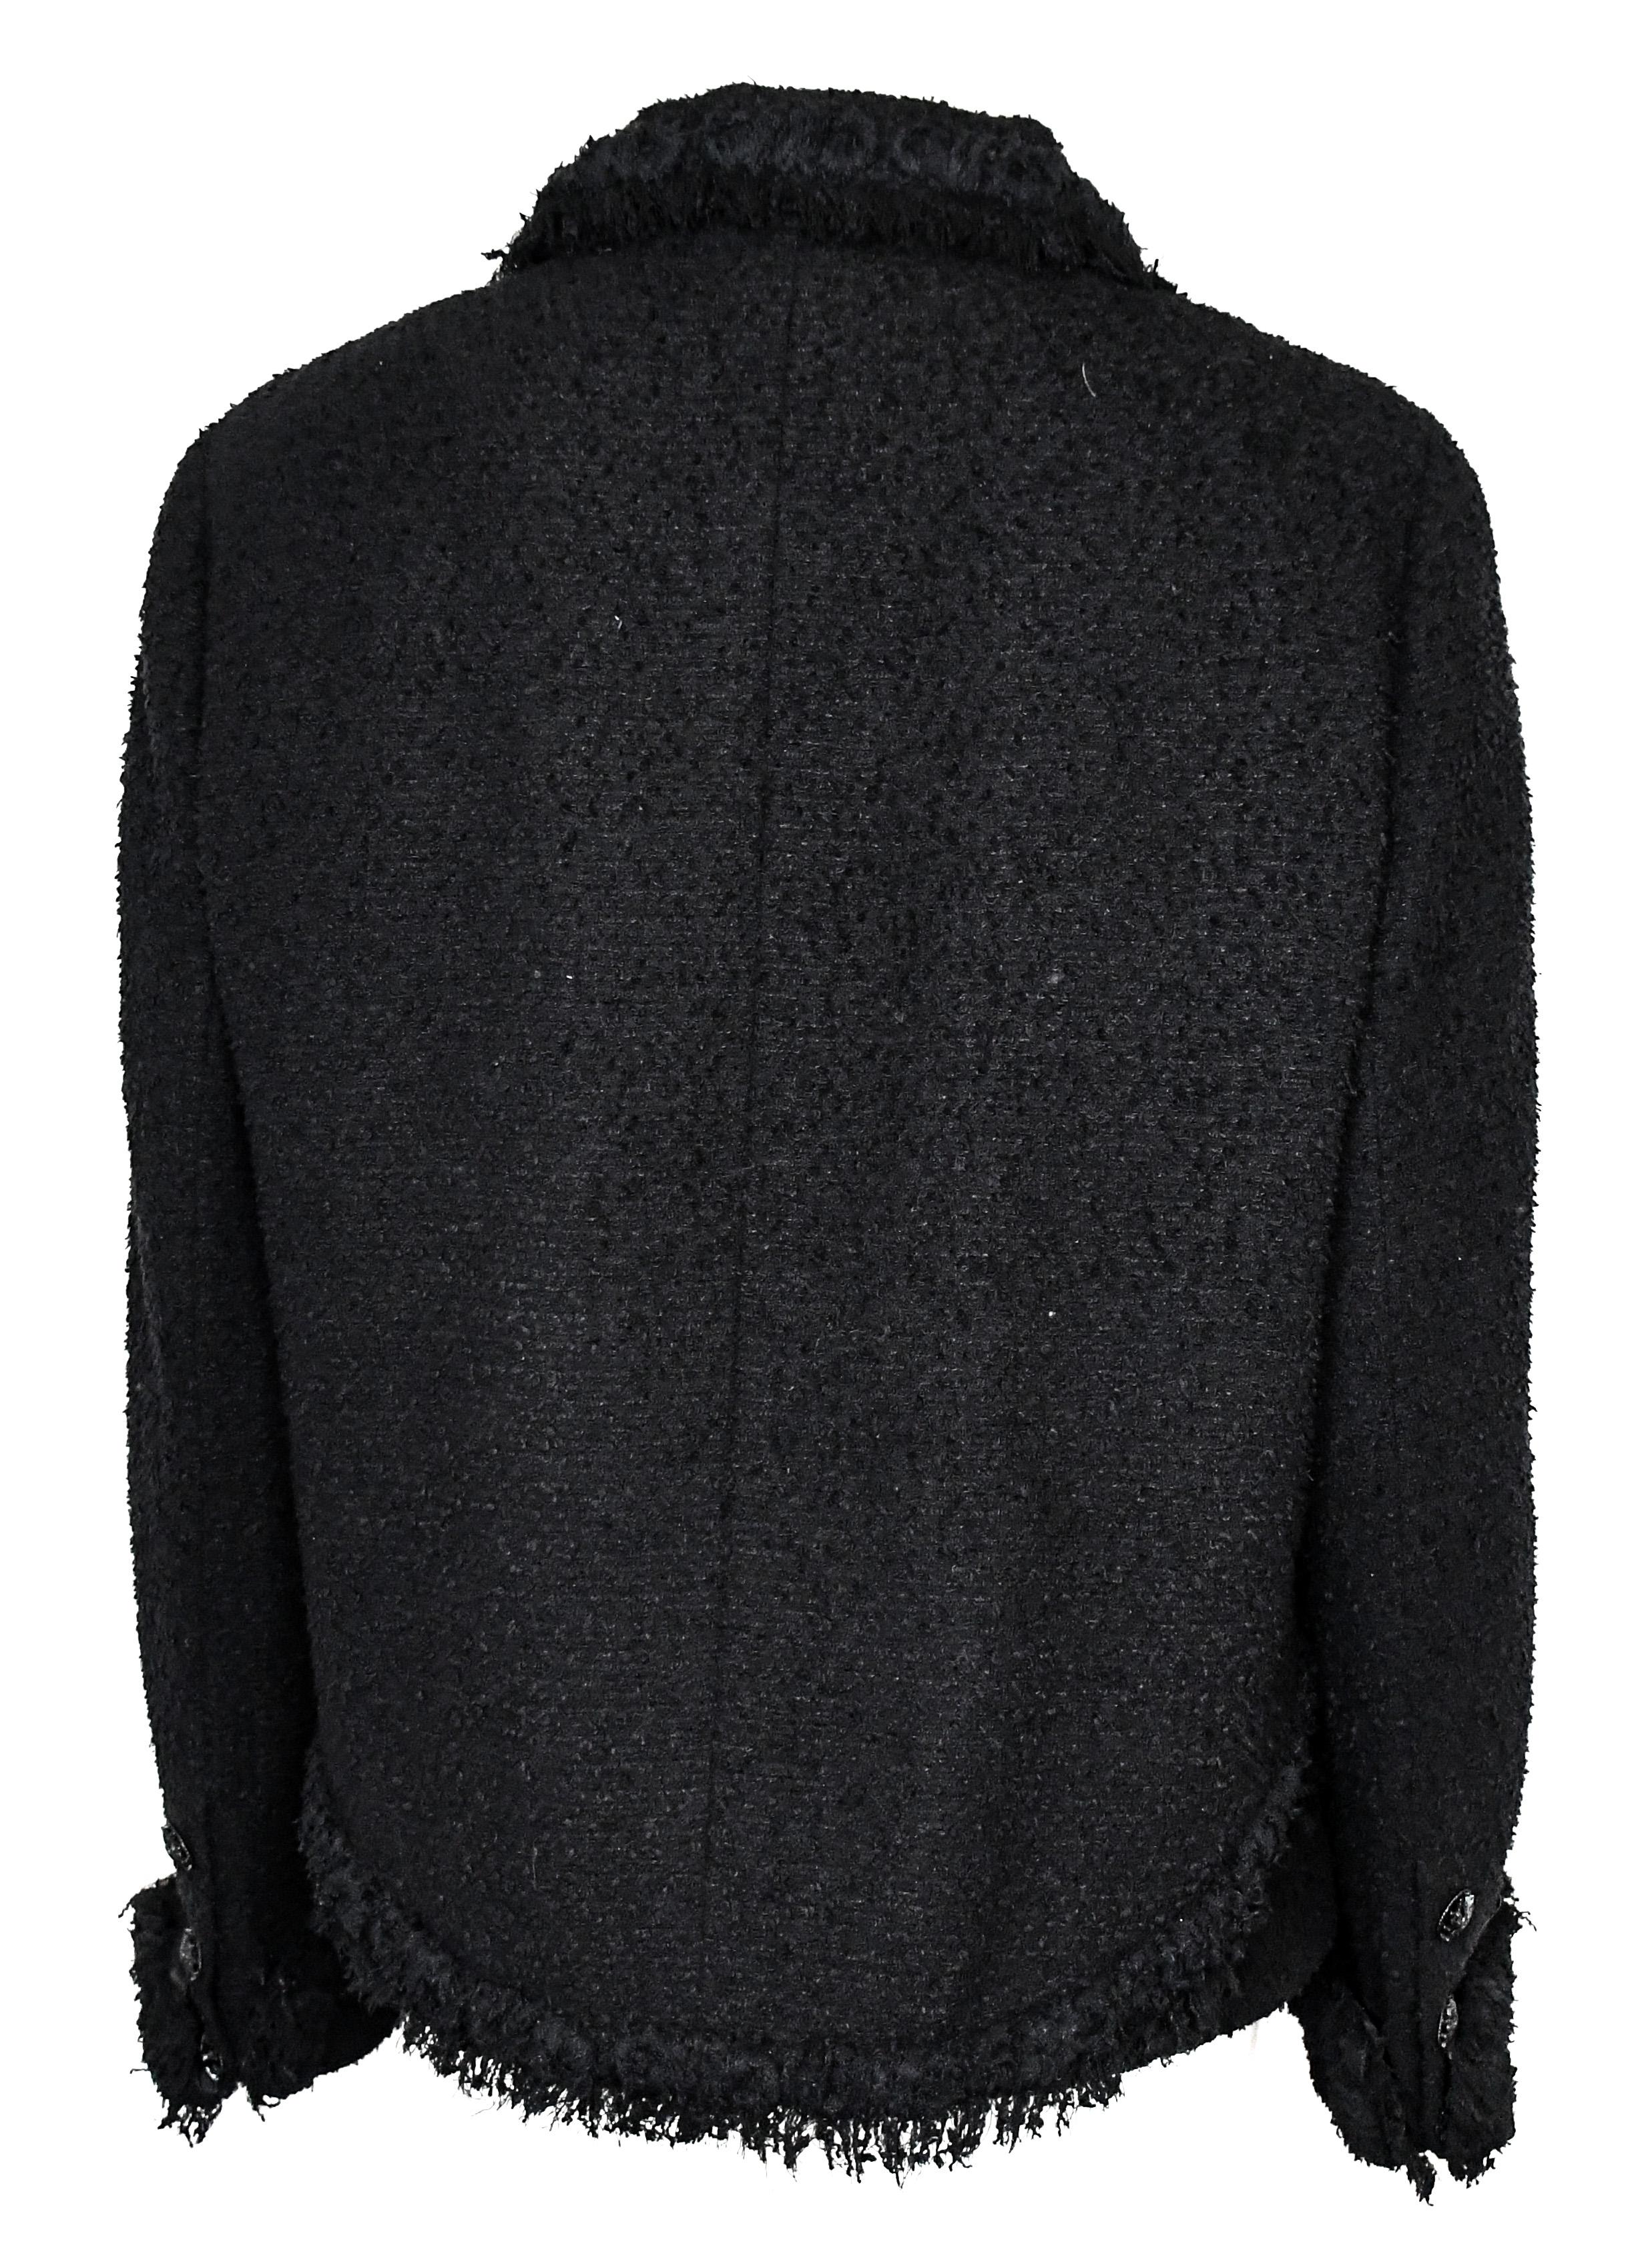 Chanel Black Tweed Top with Jacket Overlay 2008 Runway Collection 44 In Excellent Condition In Palm Beach, FL